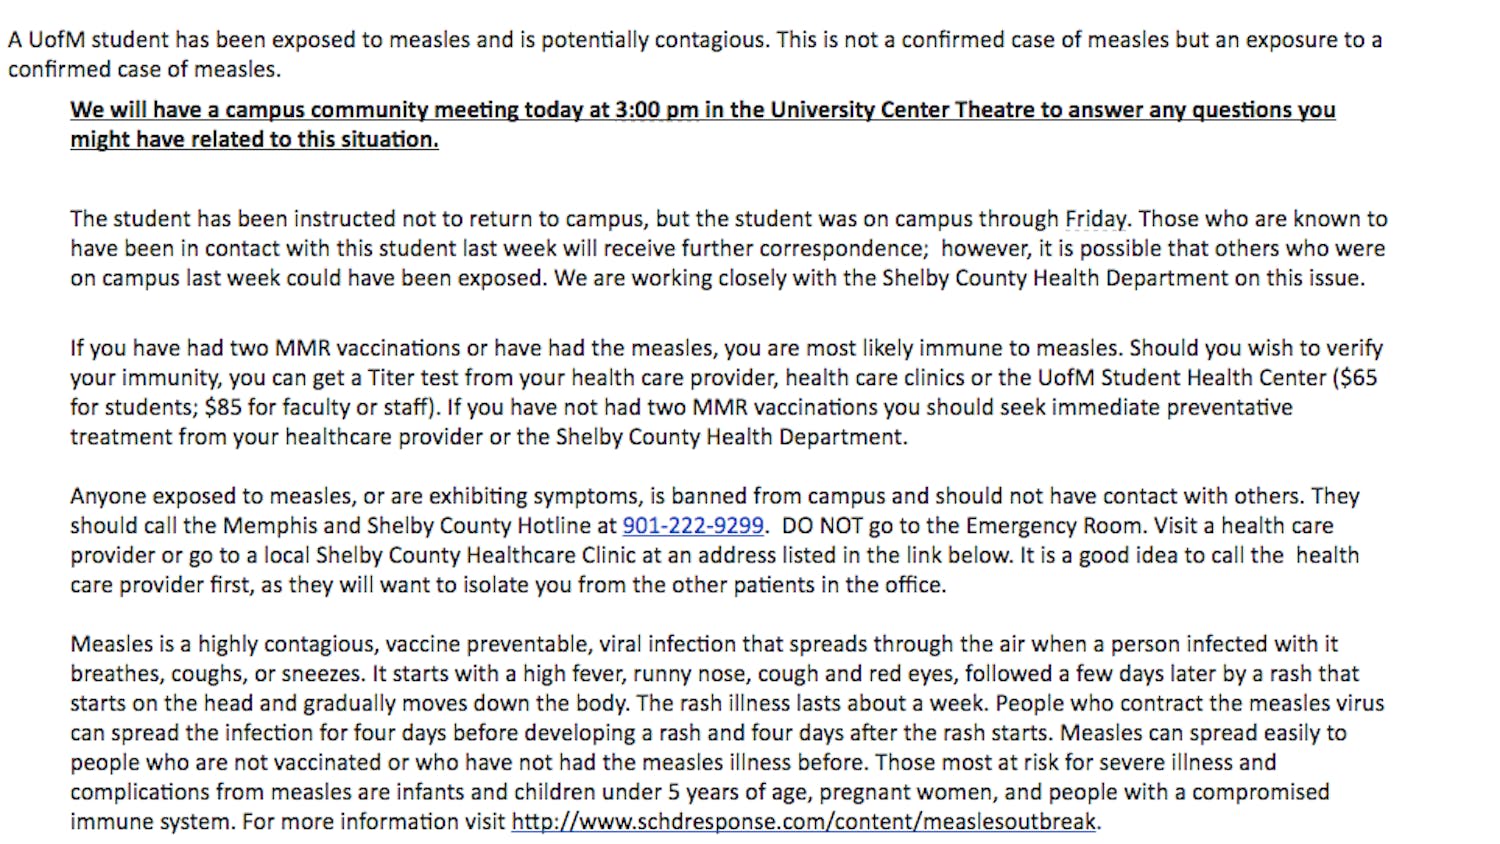 Rosie Bingham email about measles exposed student